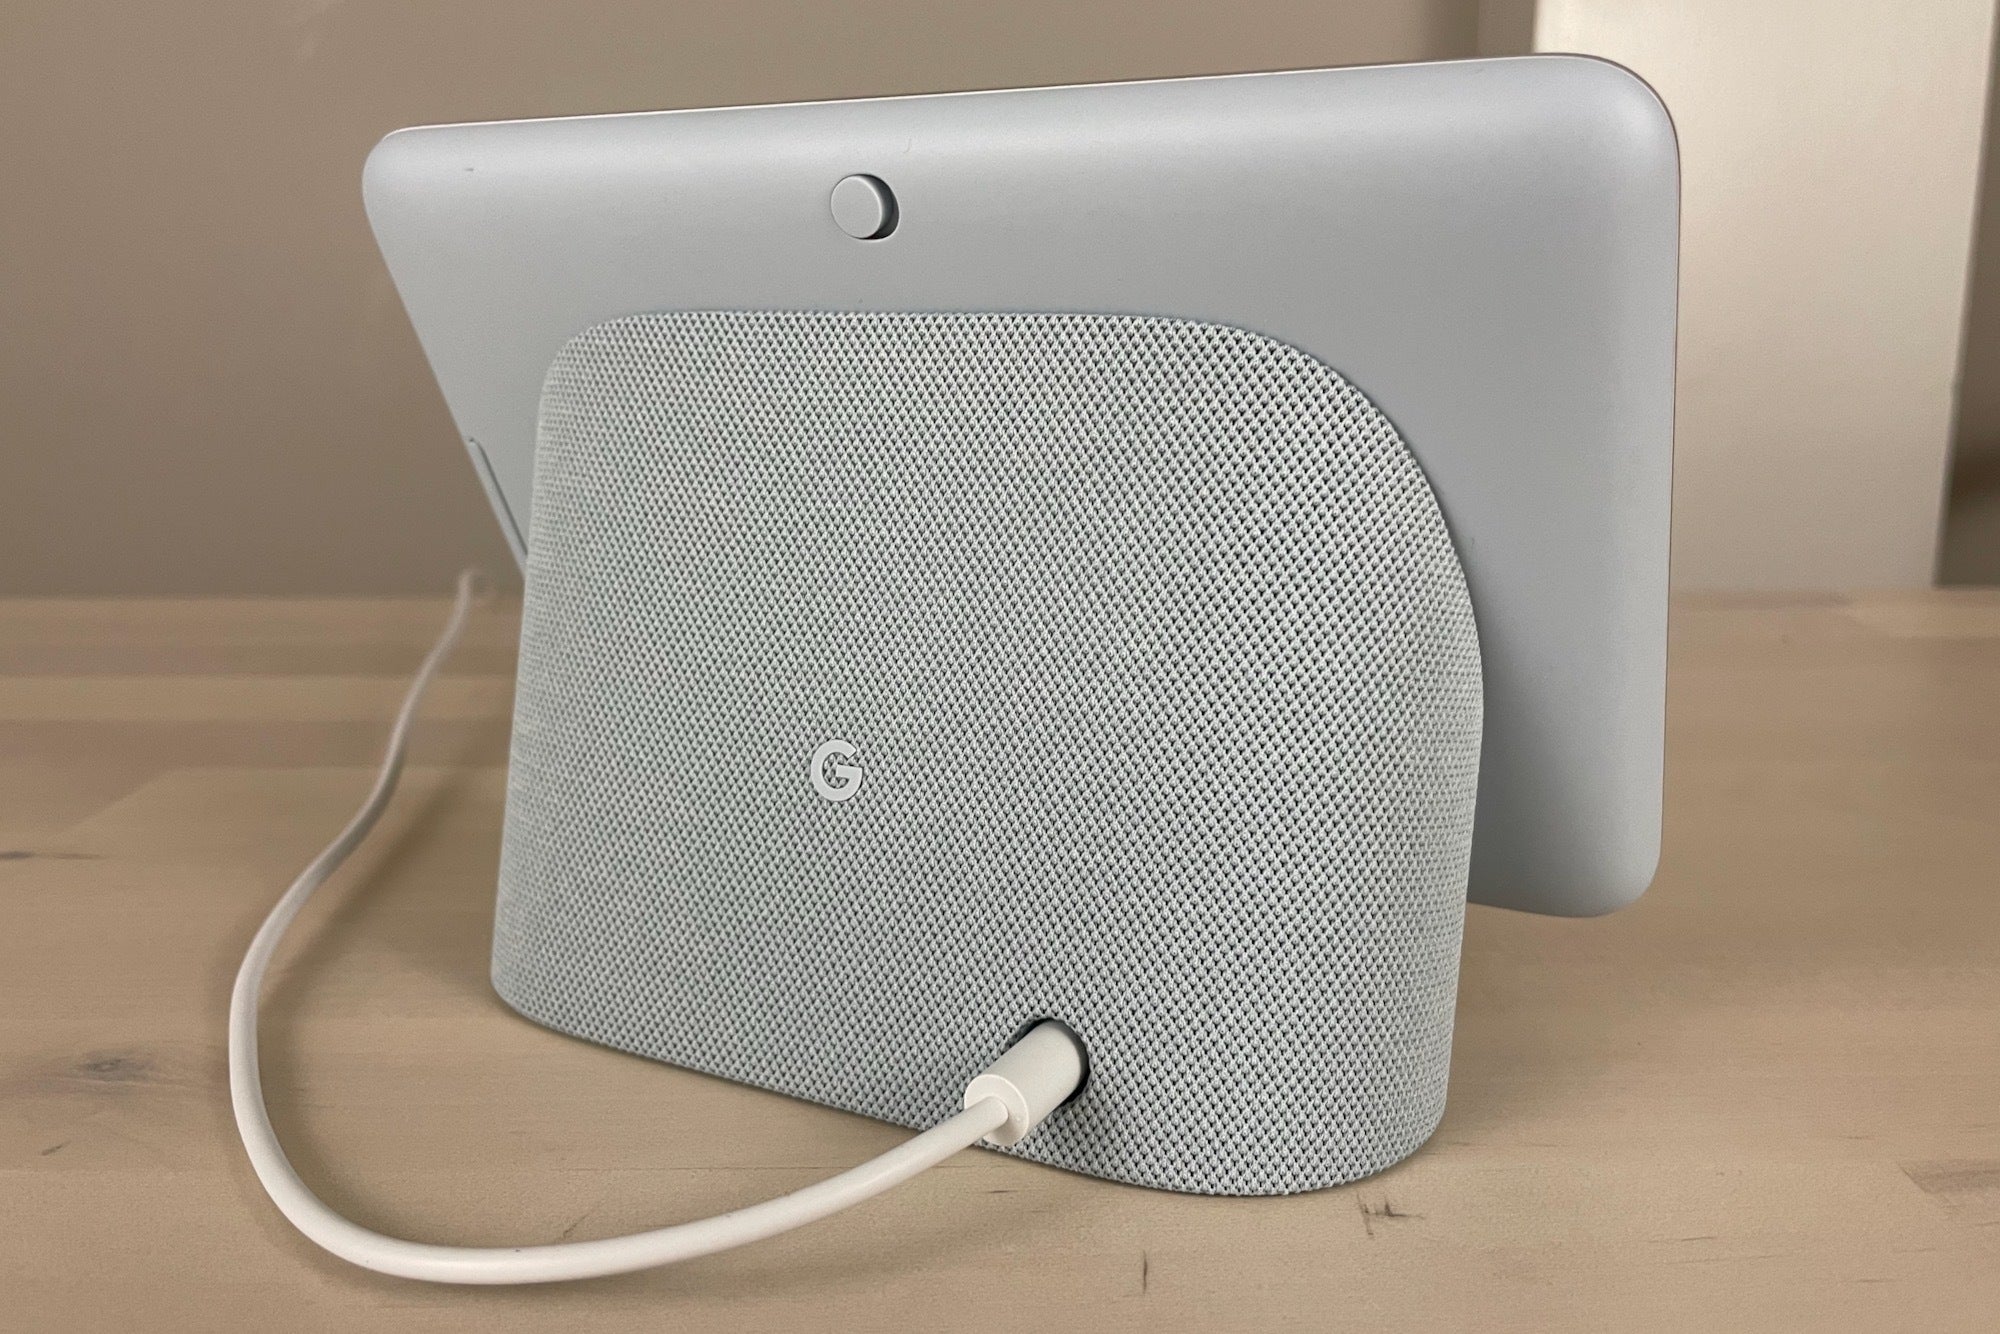 Google Nest Hub (2nd gen) review: The new Nest Hub is a yawner | TechHive